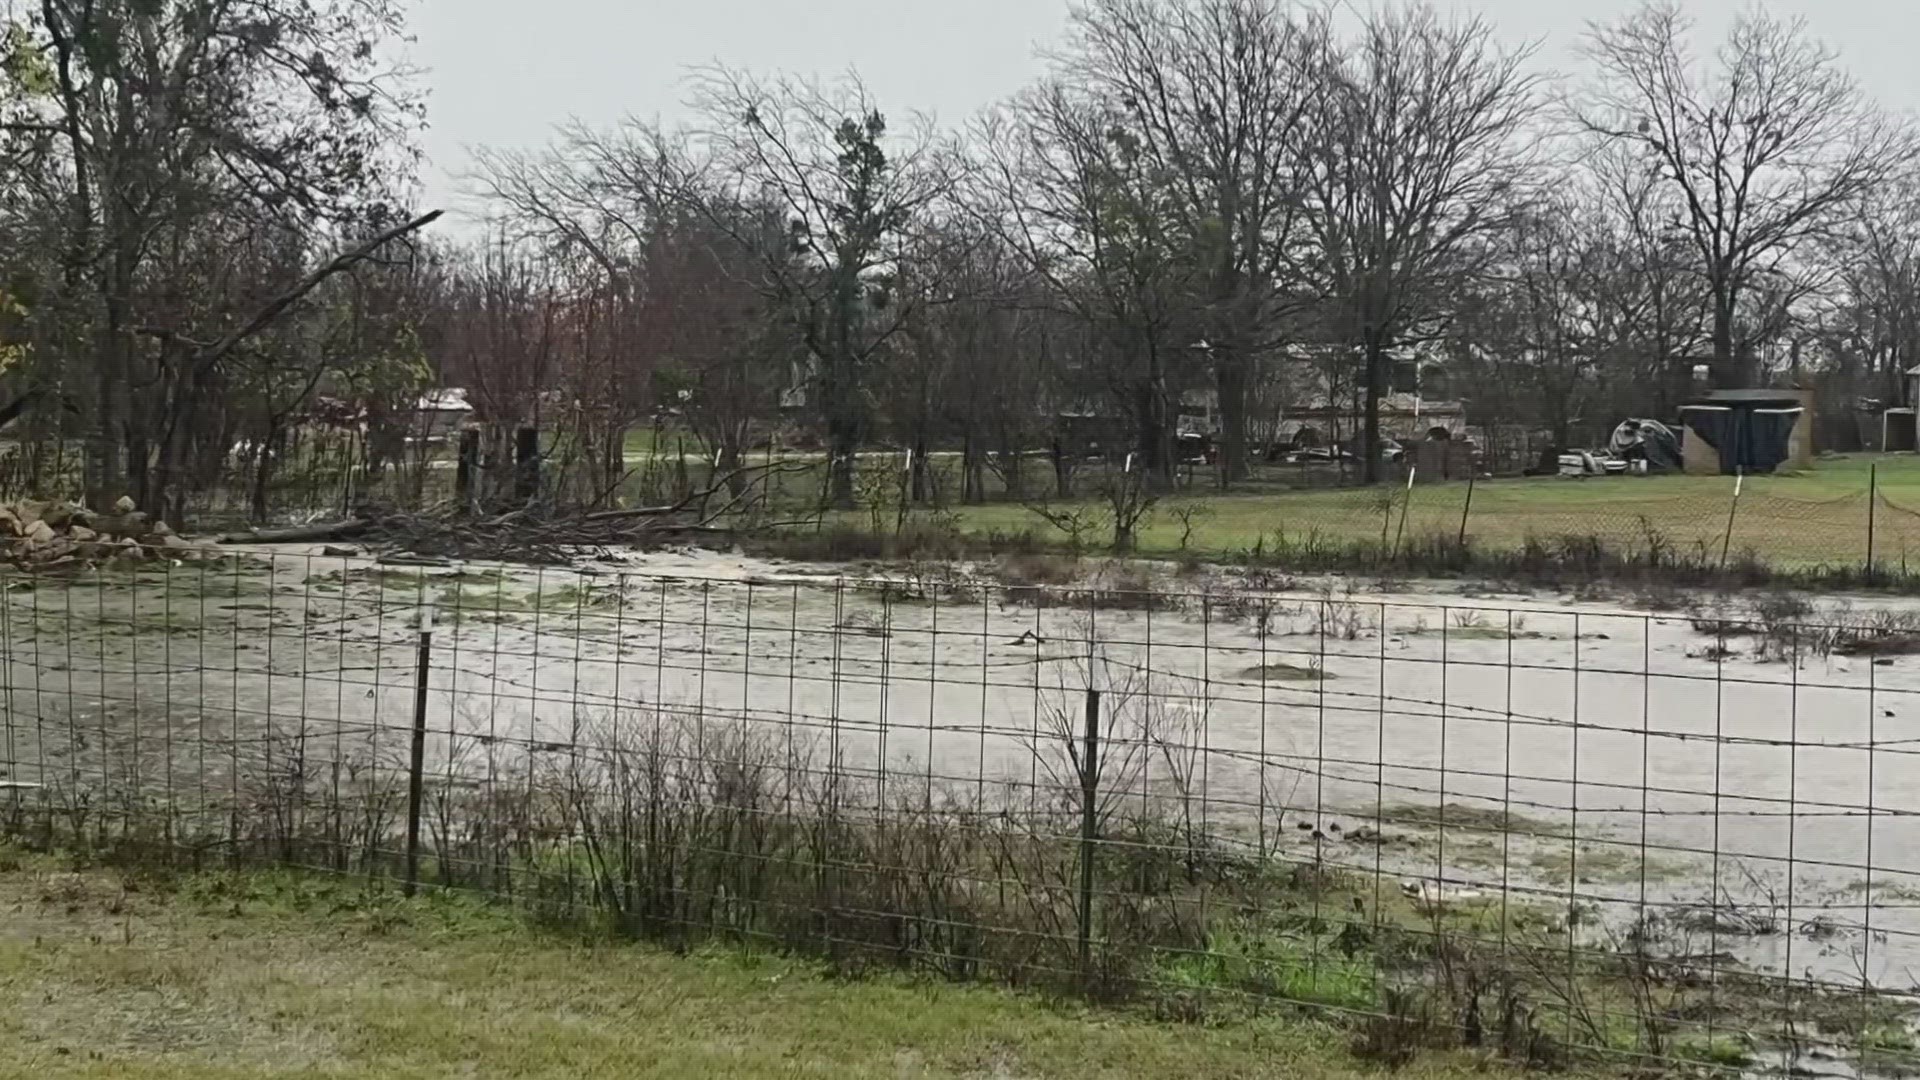 Some Temple property owners say runoff from a nearby subdivision has caused flooding and damage to their property, and that nothing has been done about it.